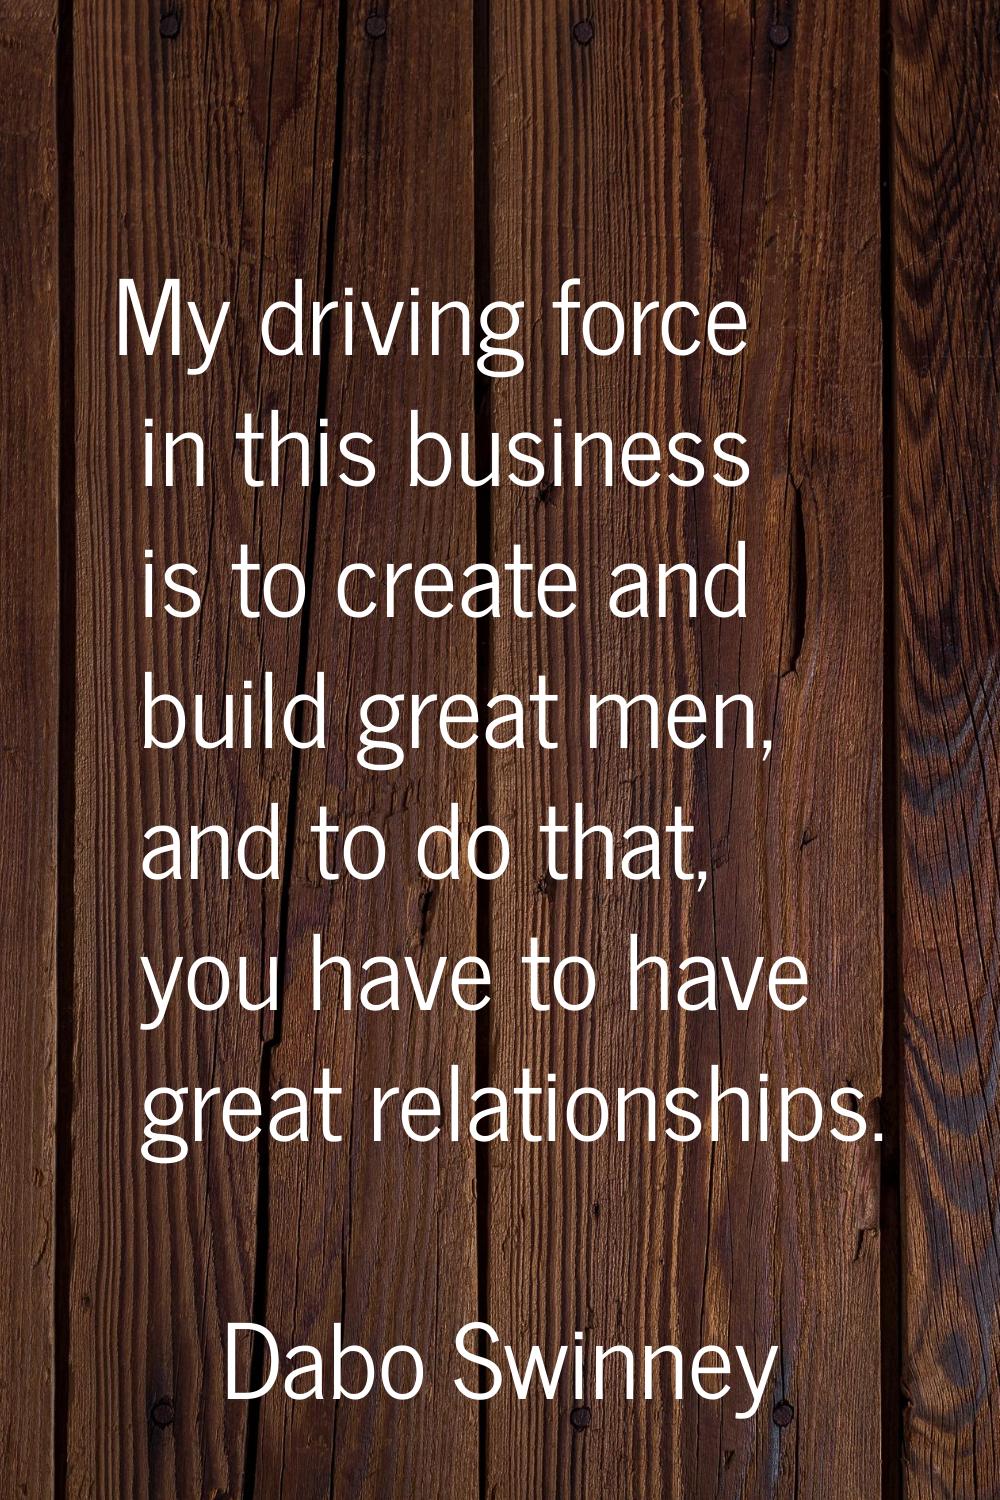 My driving force in this business is to create and build great men, and to do that, you have to hav